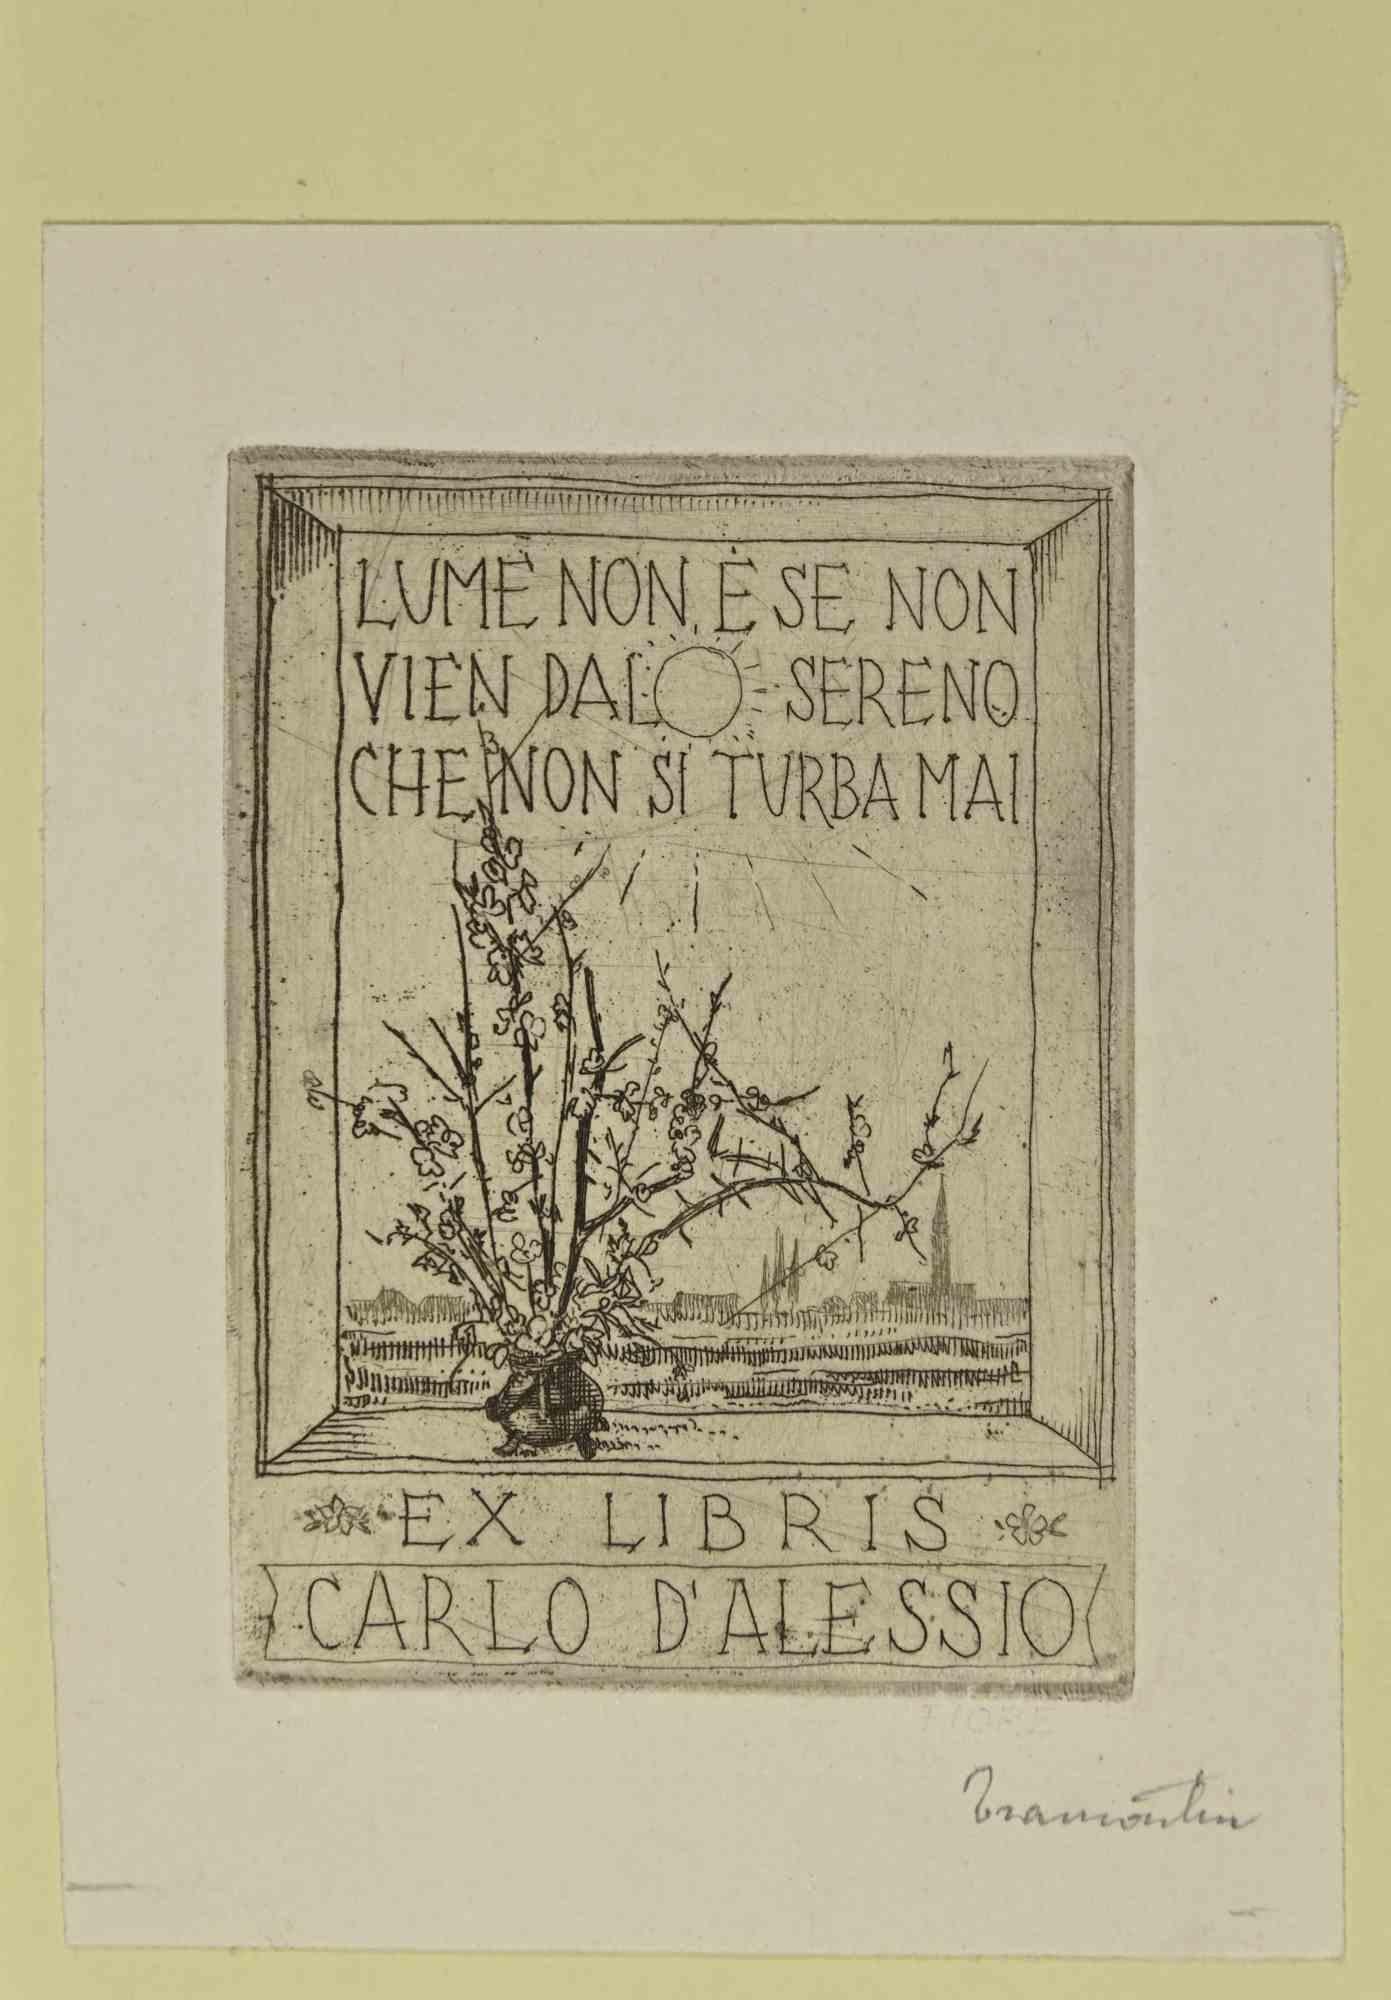 Ex Libris - Carlo D'Alessio is an Artwork realized in 1980 s. by the Italian Artist Virgilio Tramontin (1908-2002).

Etching print on ivory paper. Hand Signed on the right corner.

The work is glued on ivory cardboard.

Total dimensions: 16x11